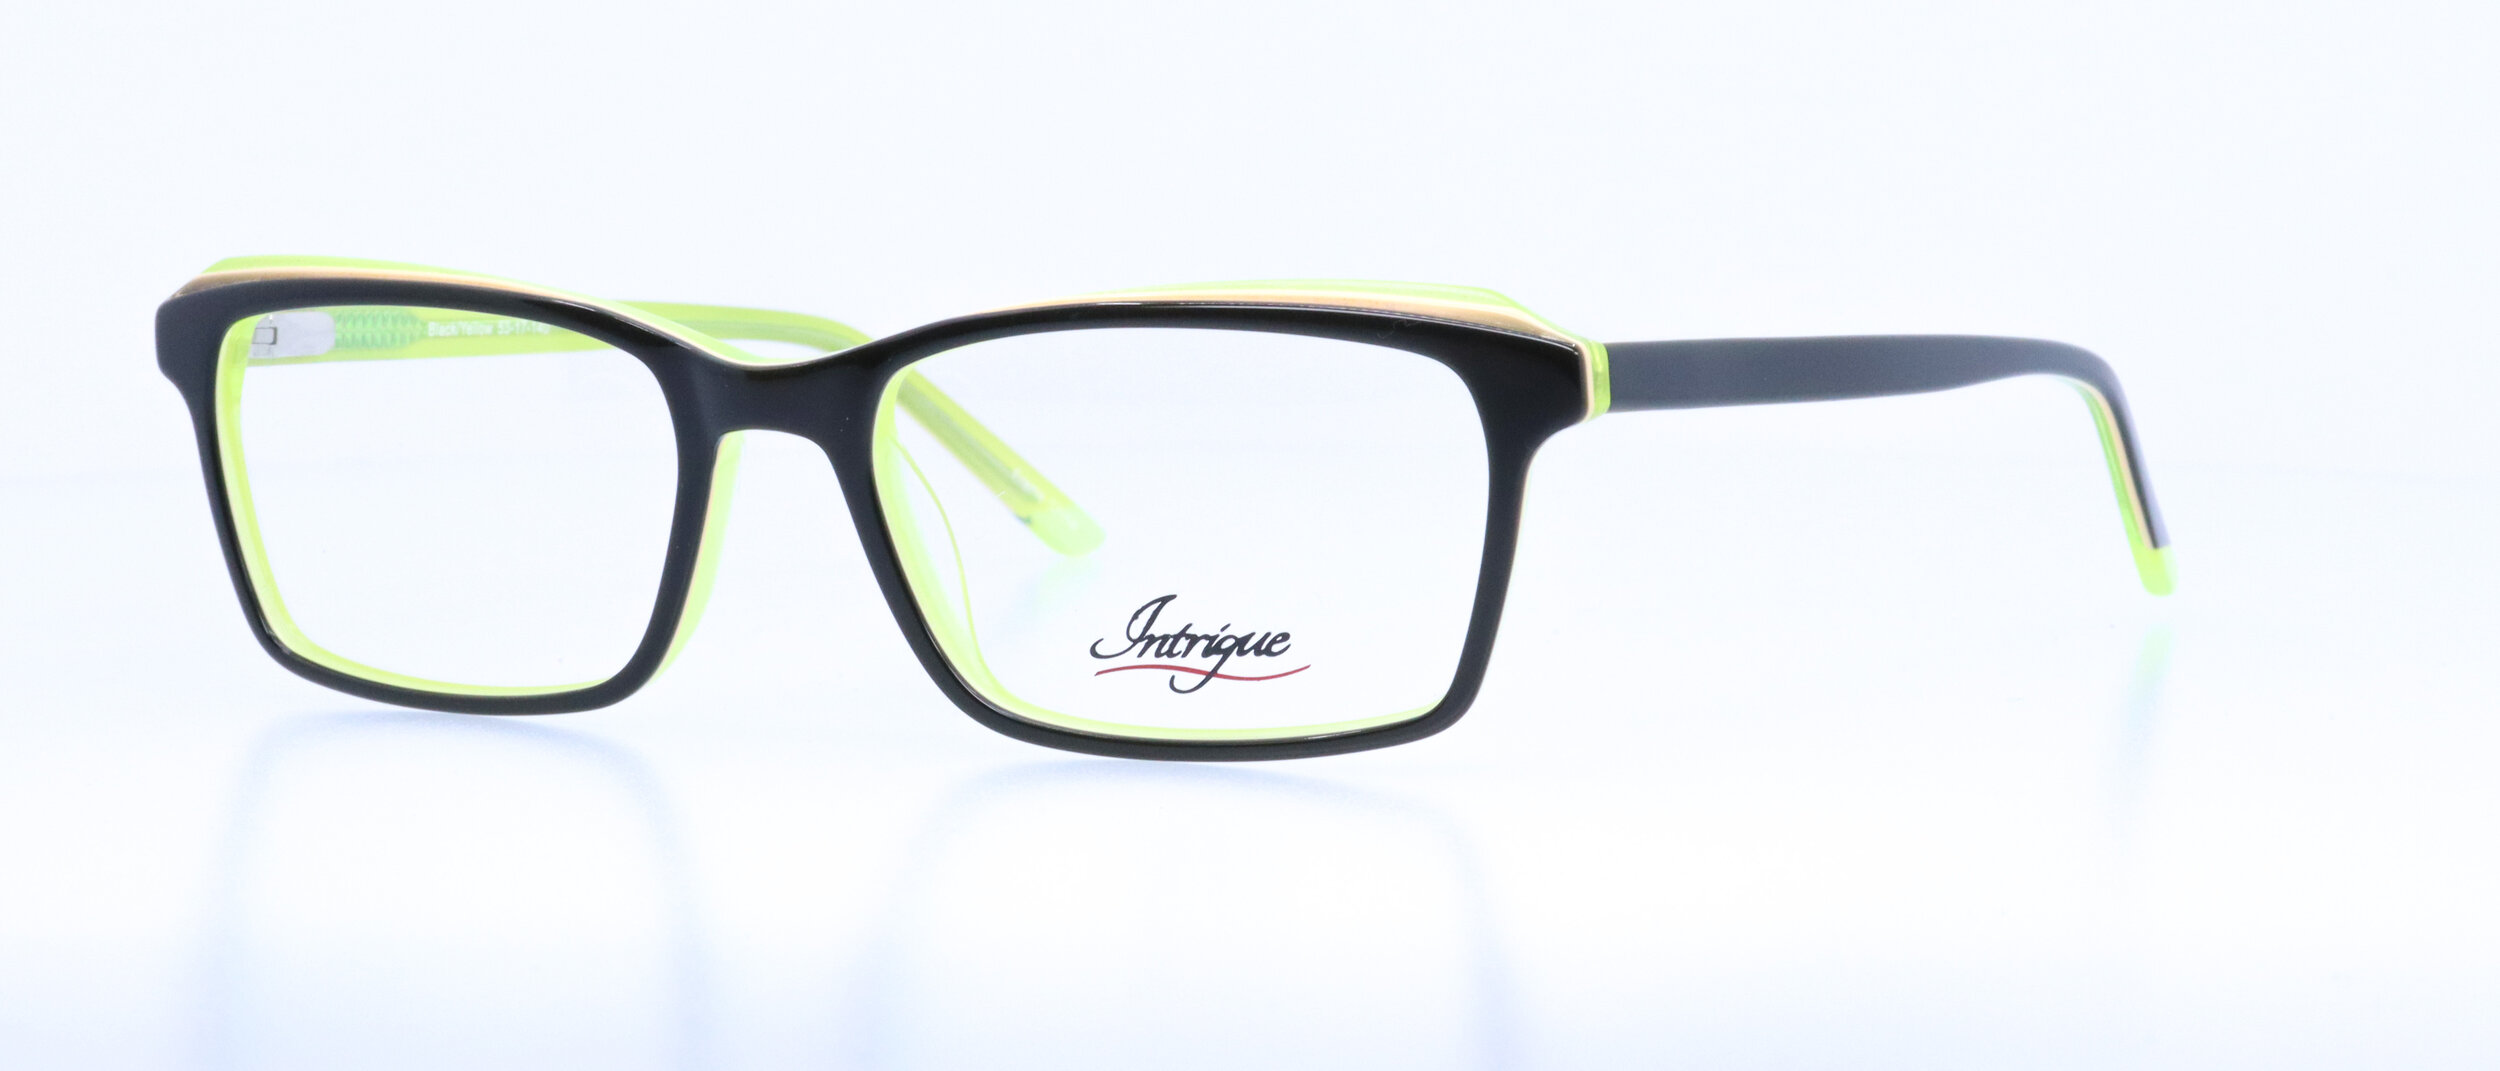  INT200: 53-17-140, Available in Black/Yellow or Tortoise/Aqua 